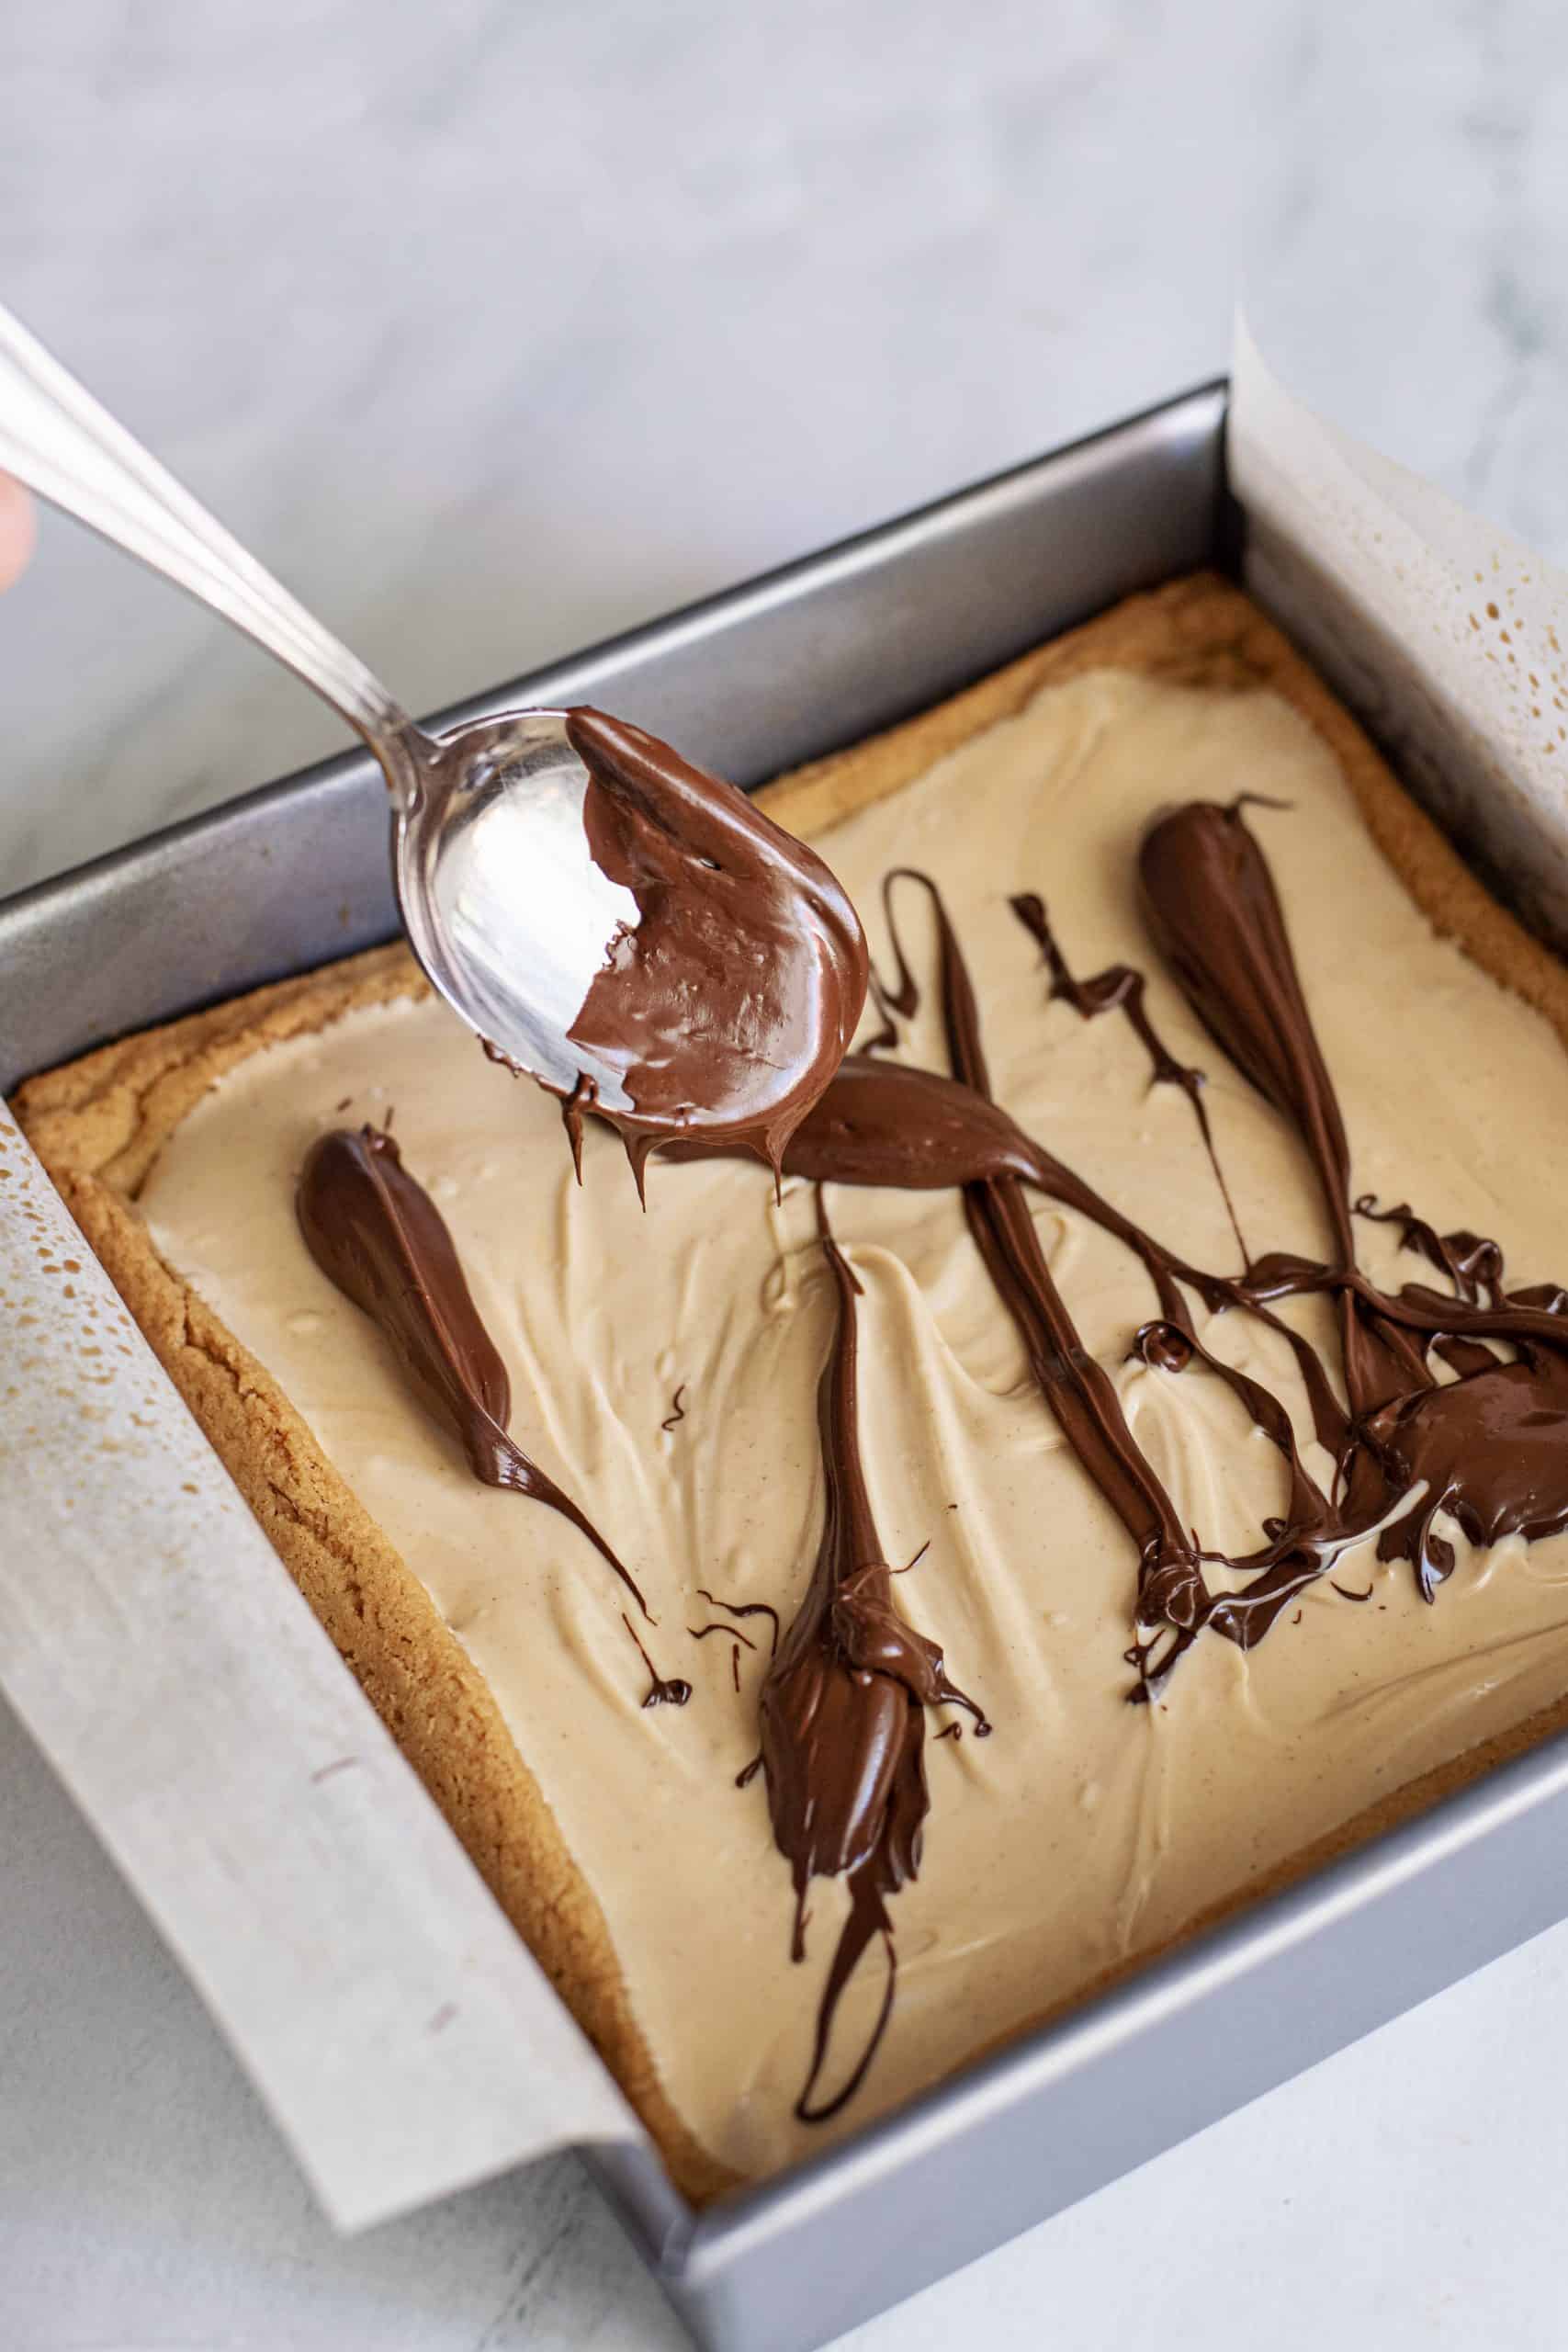 spooning melted chocolate over white cholate mixture on sugar cookie bars.